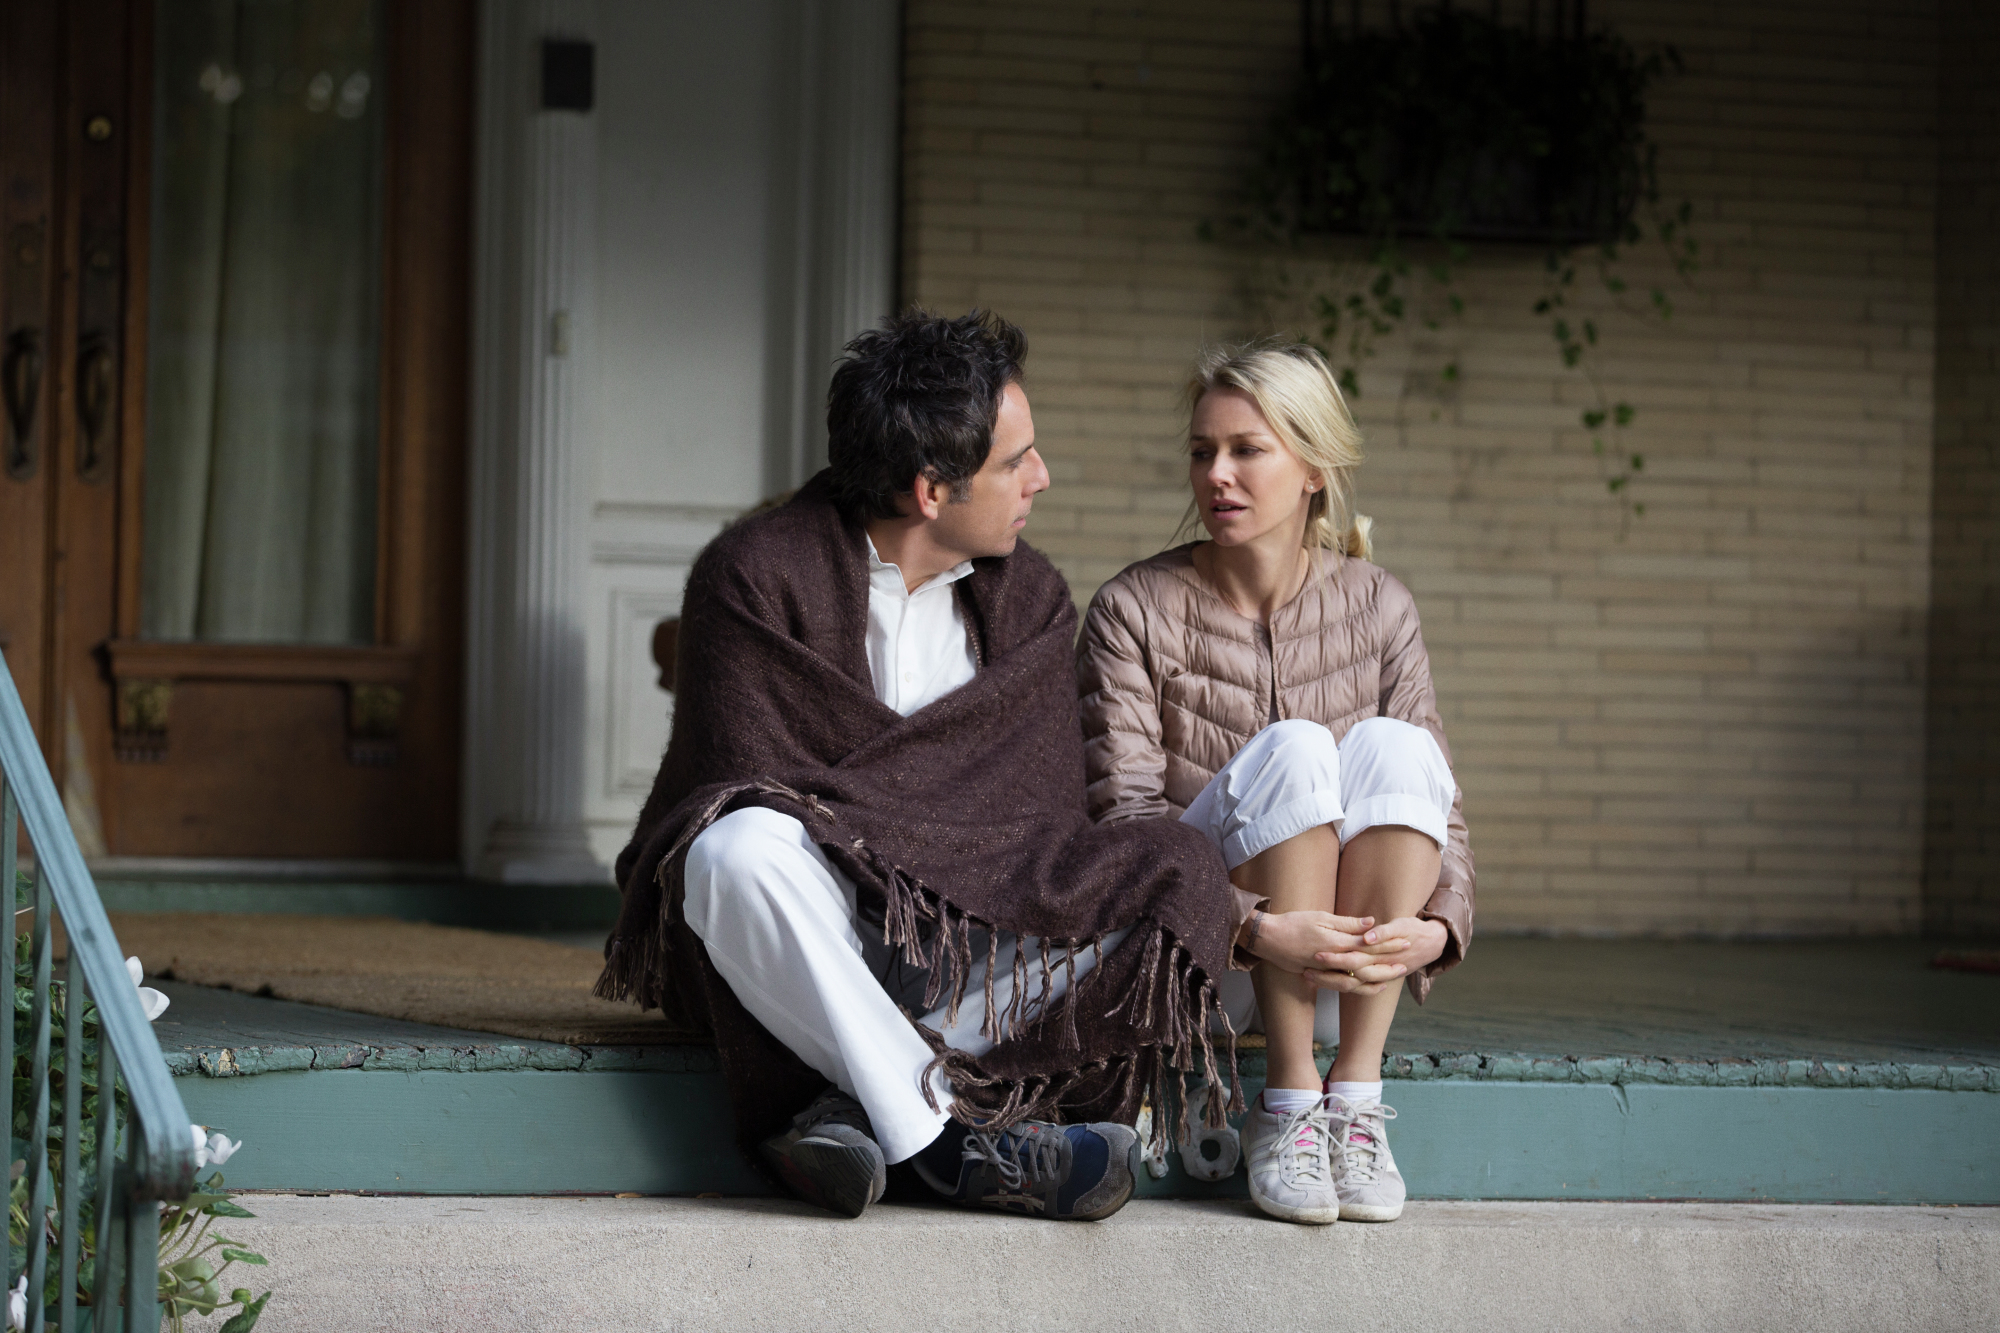 Still of Ben Stiller and Naomi Watts in While We're Young (2014)